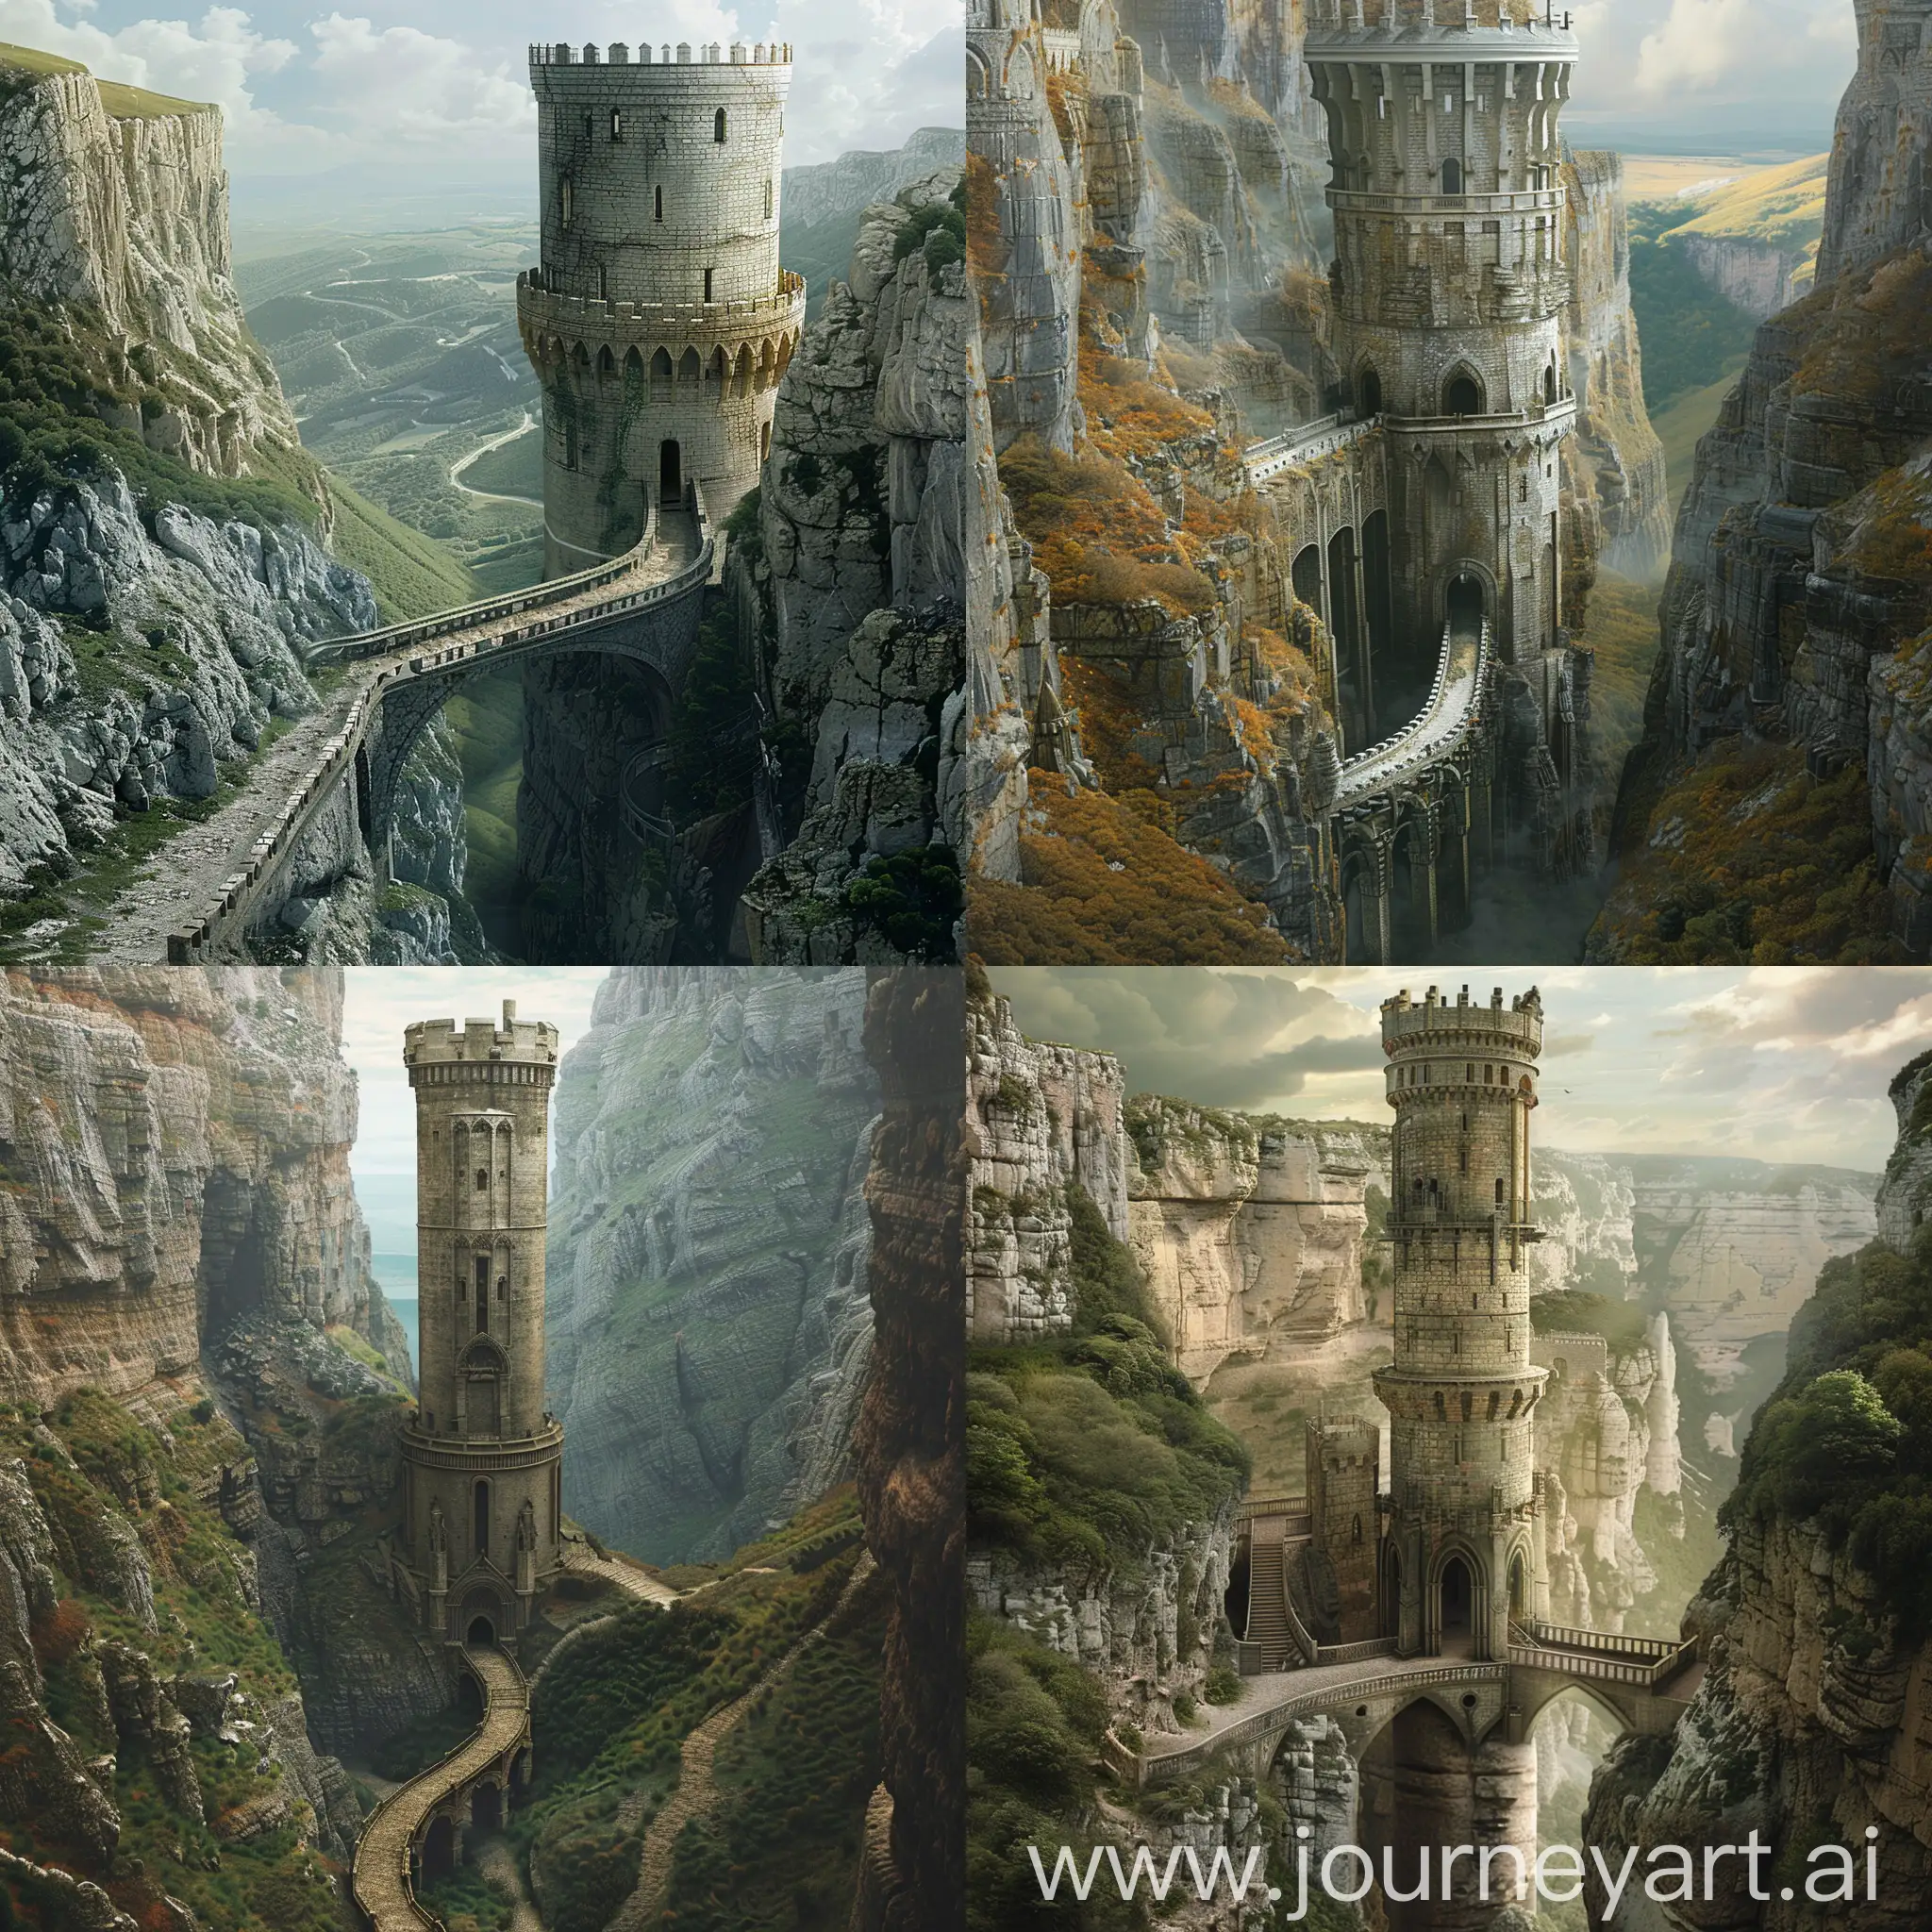 Medieval style, a immense tower rules over a endless valley, the entrance of the tower is connected by a bridge with a path 